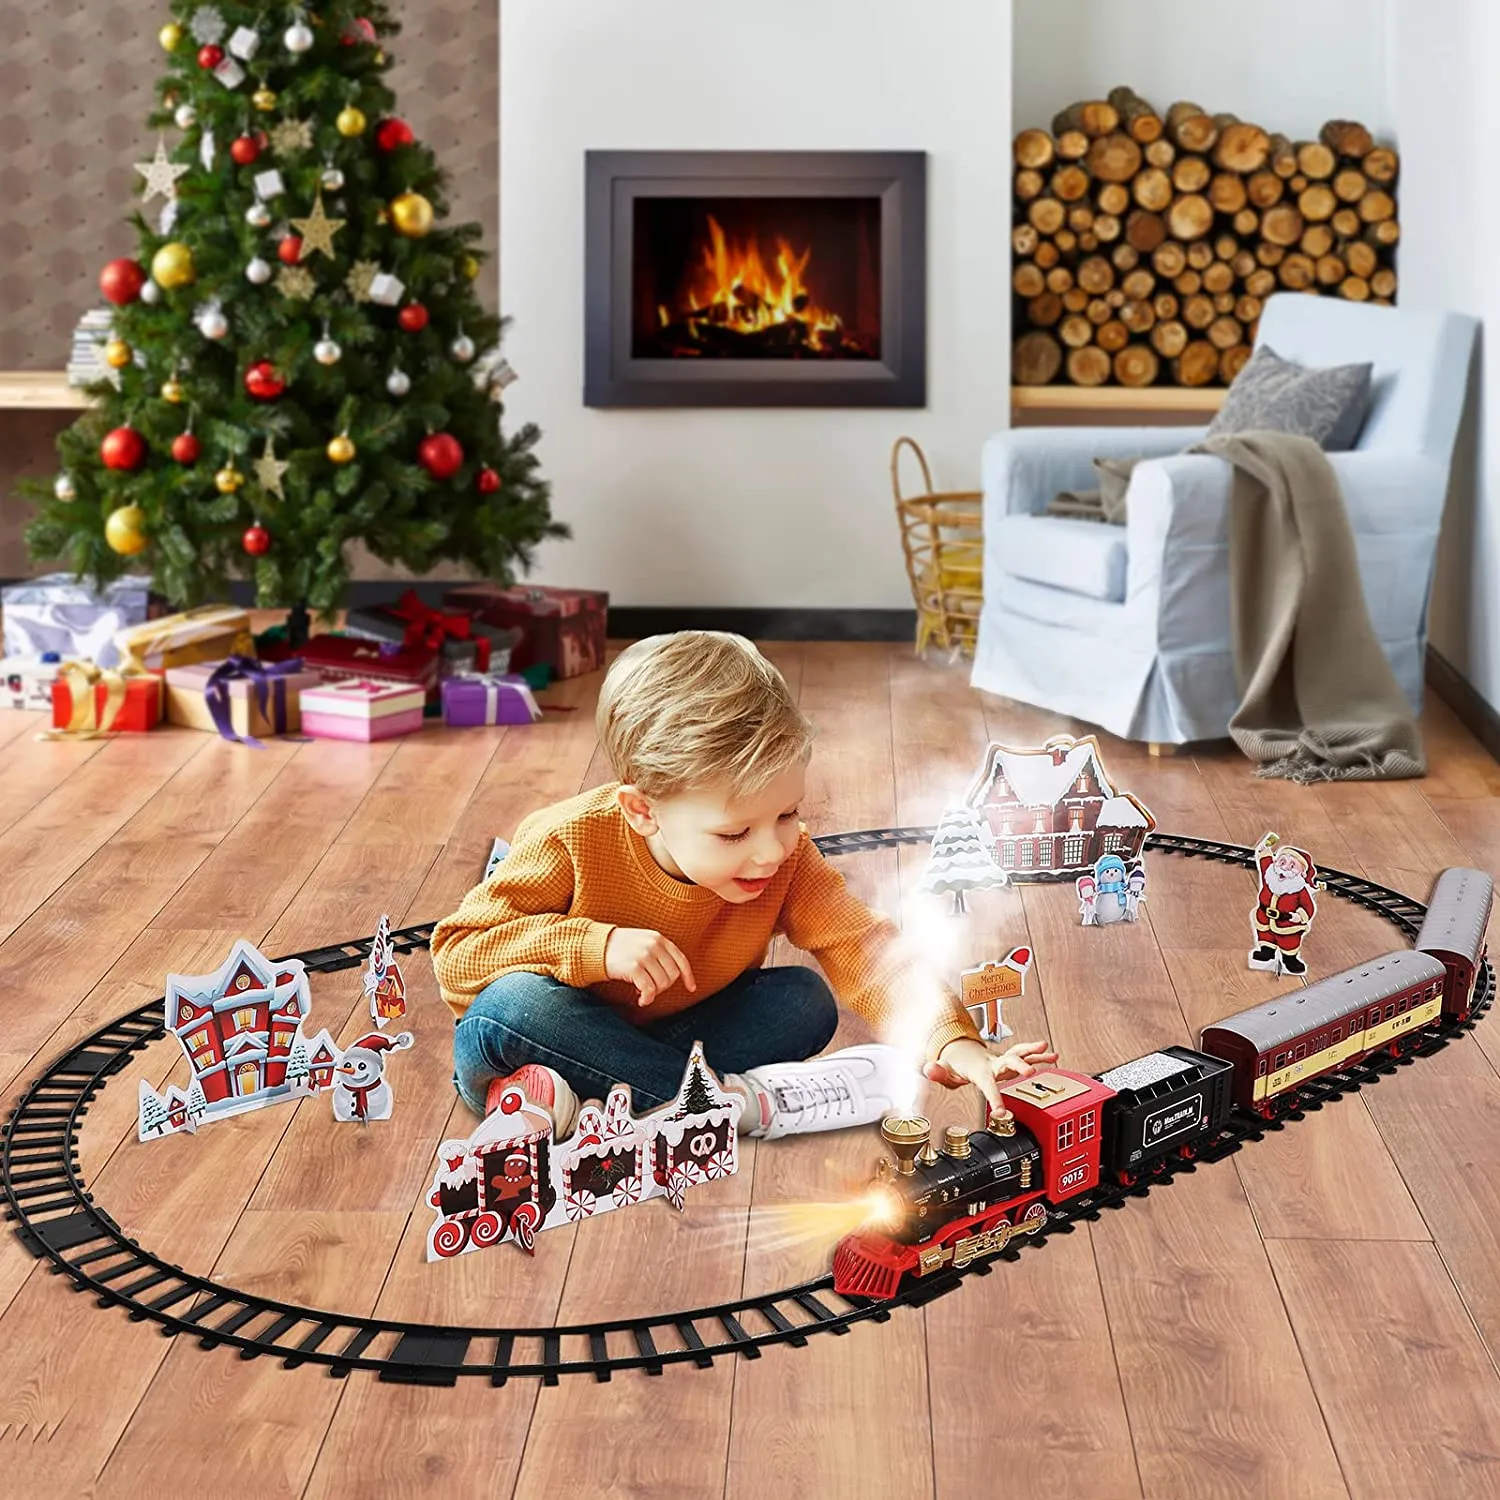 Engine Cargo Car and Long Tracks Electric Track Toy Train Set with Steam Locomotive Battery Operated Play Toys with Smoke Light Sounds